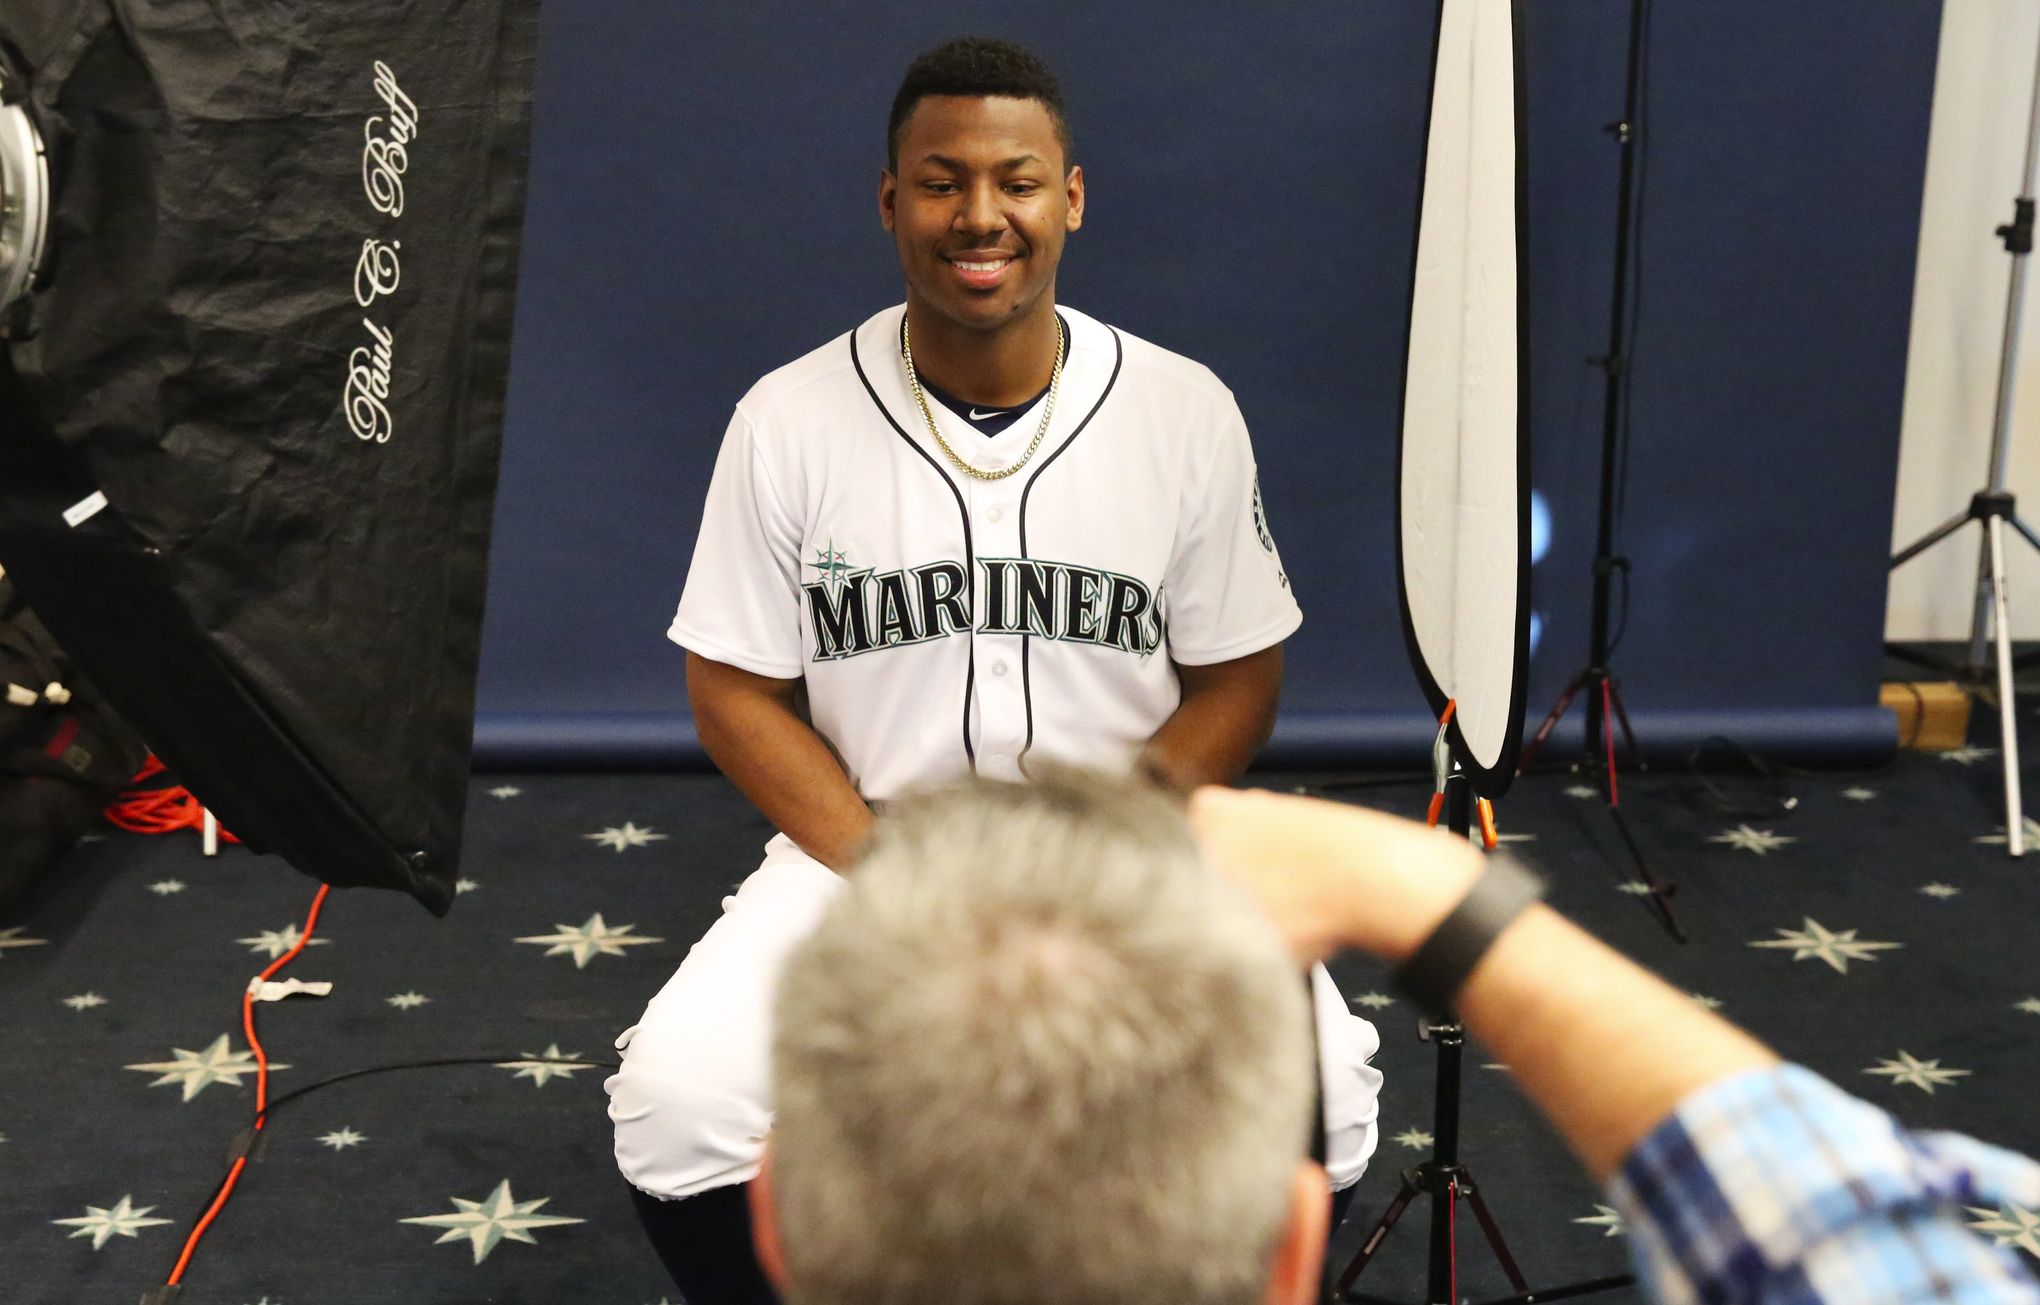 Another knee surgery for Mariners top prospect Kyle Lewis will